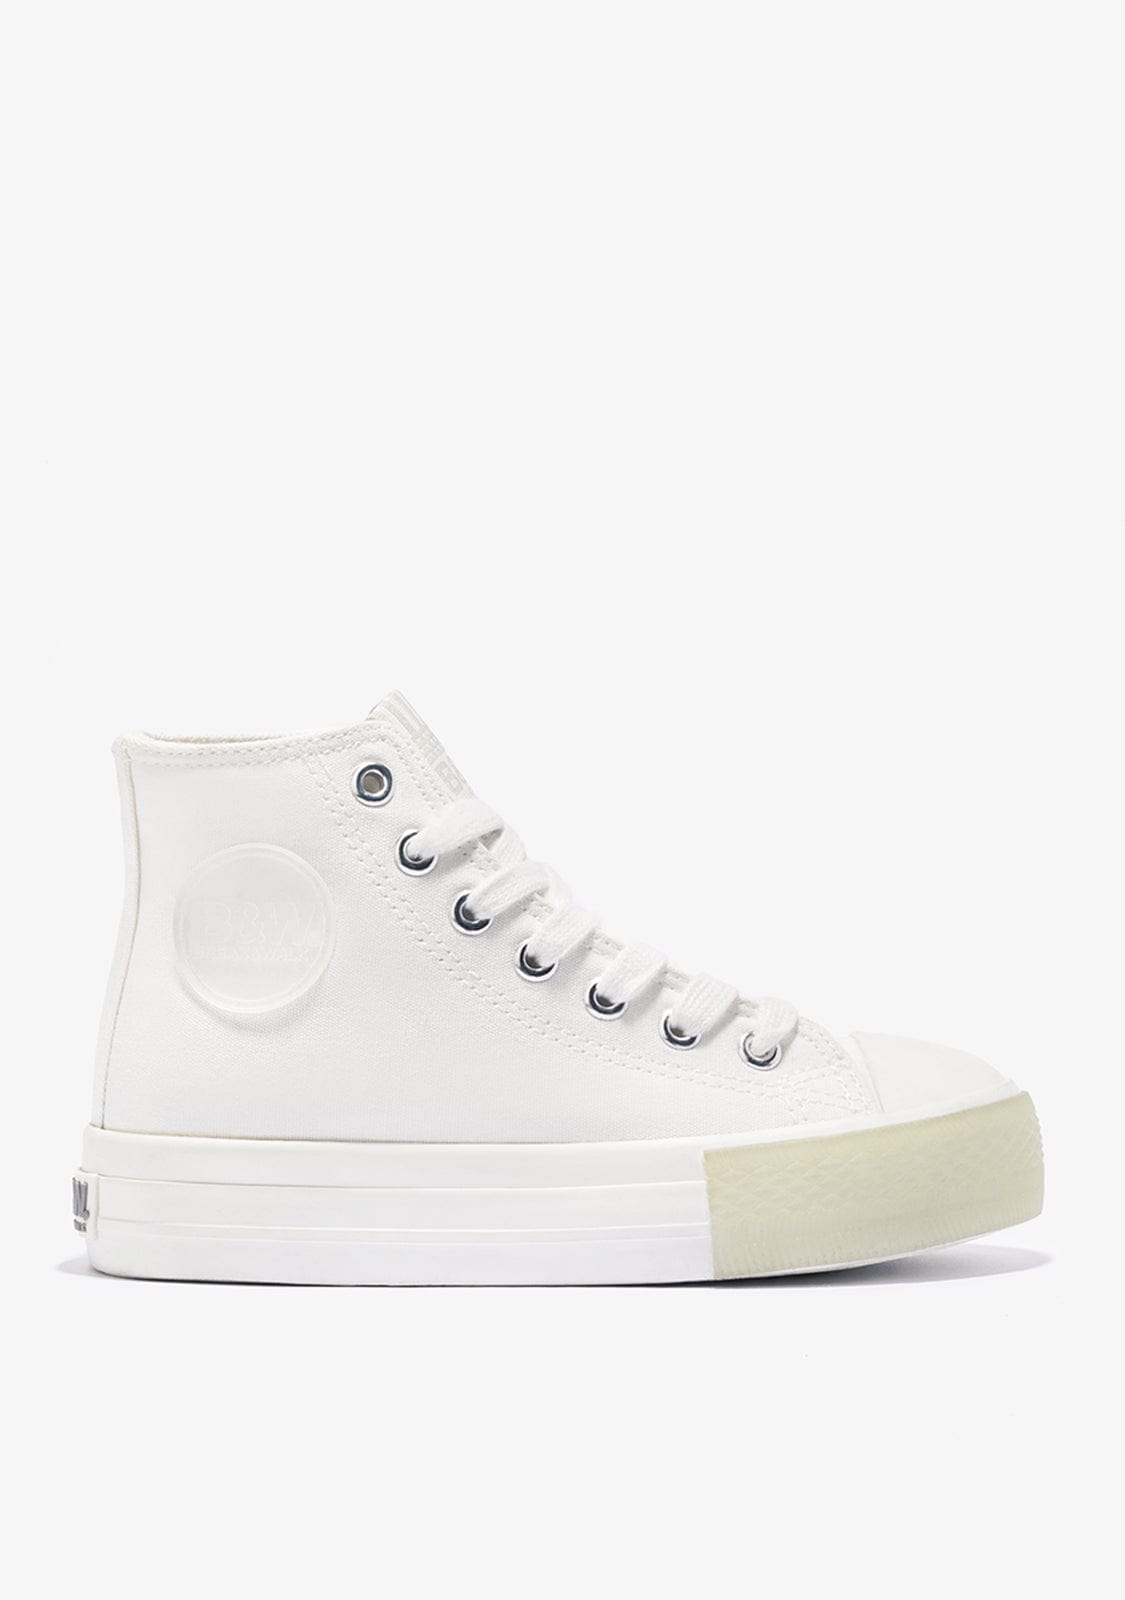 White Basic Hi-Top Sneakers Canvas